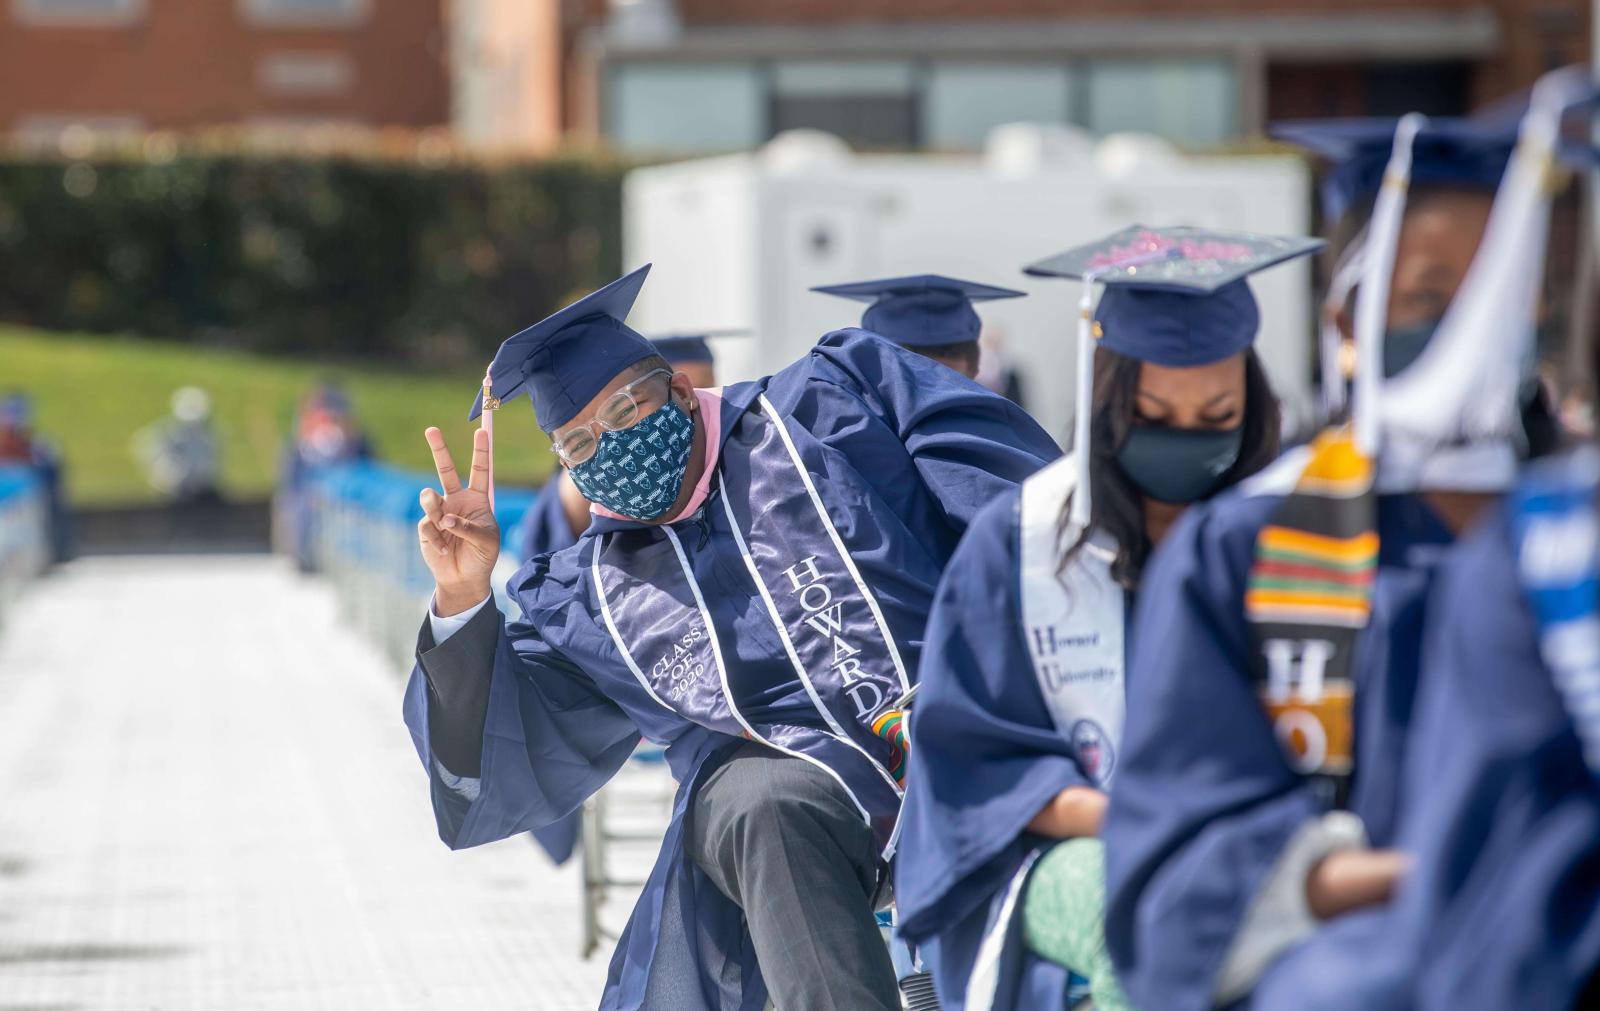 Student in seat at graduation throwing up a peace sign